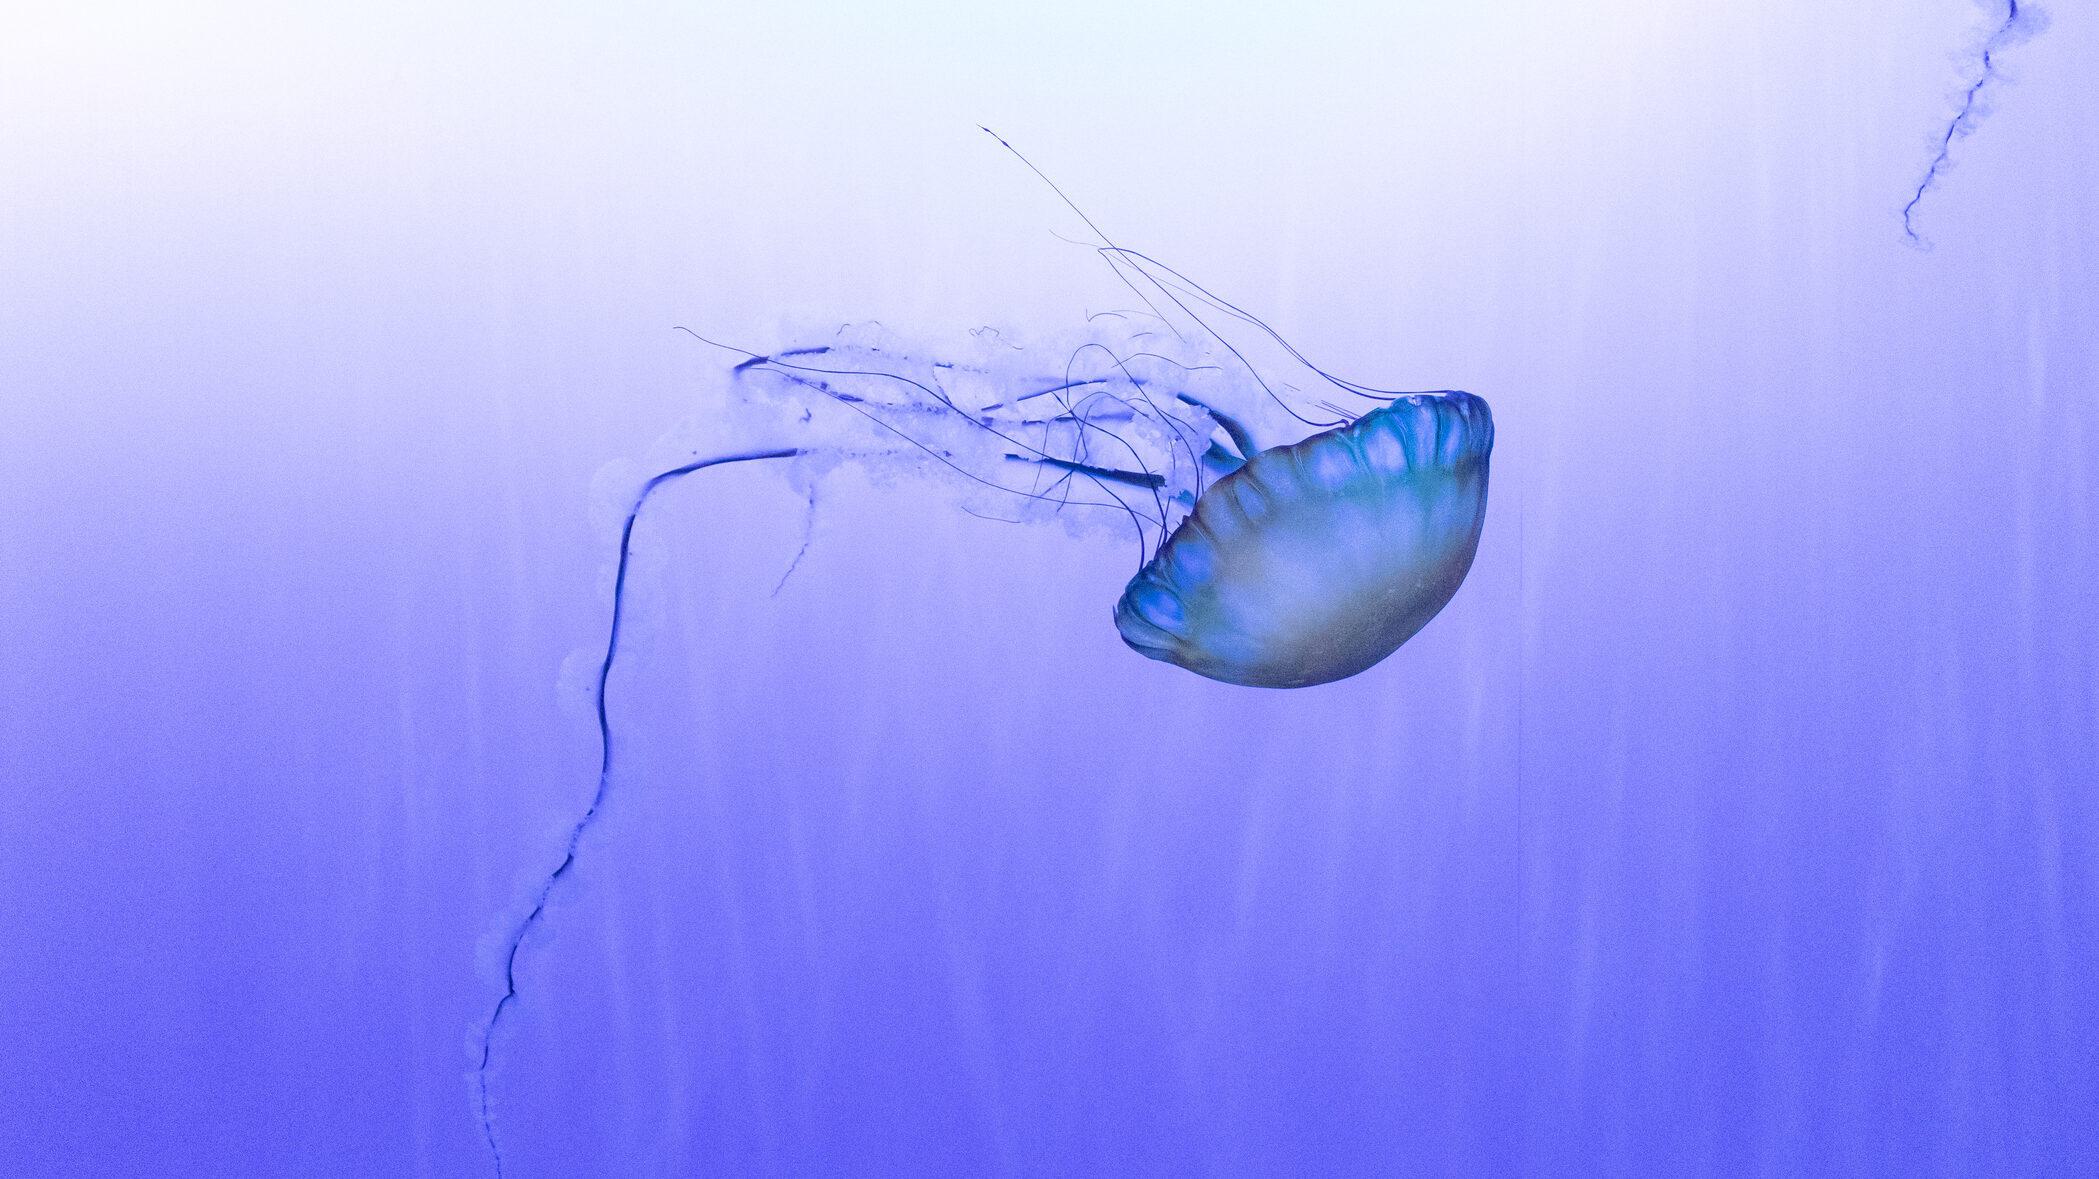 Sea nettle floating in exhibit. Plastic bags are often confused as jellies by sea turtles that then ingest them.